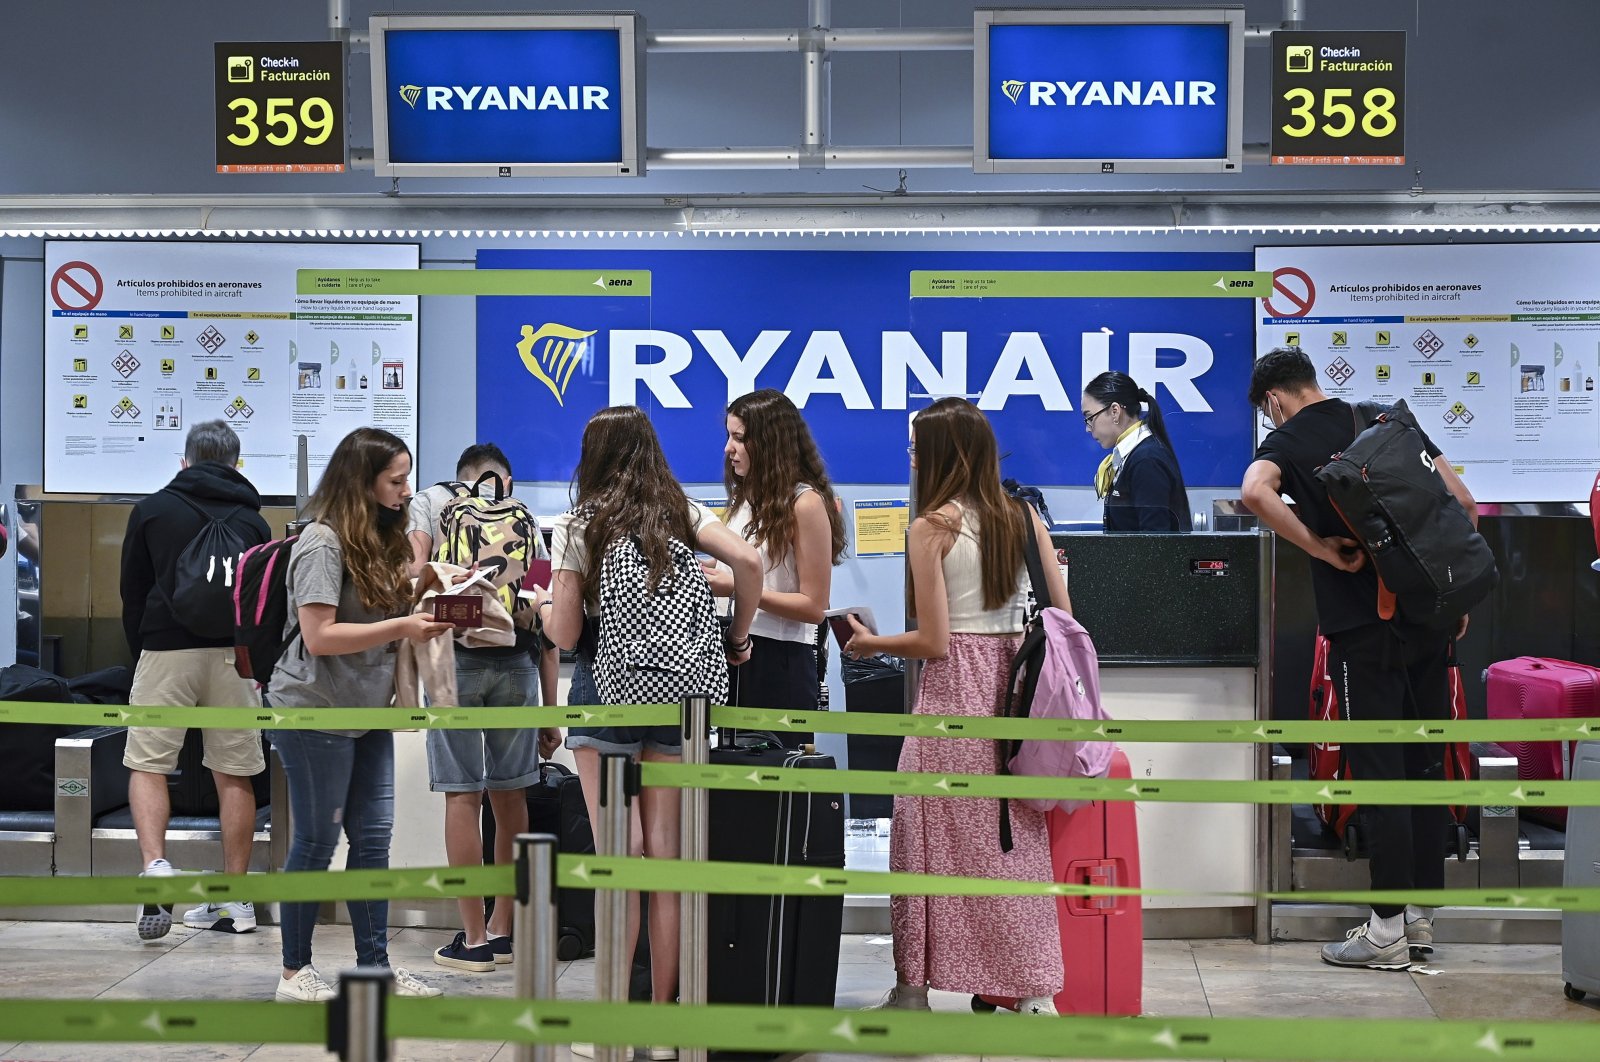 Travelers wait near a Ryanair check-in desk during the first day of a strike called by Ryanair crew, at Adolfo Suarez Madrid Barajas International Airport, in Madrid, Spain, June 24, 2022. (EPA Photo)